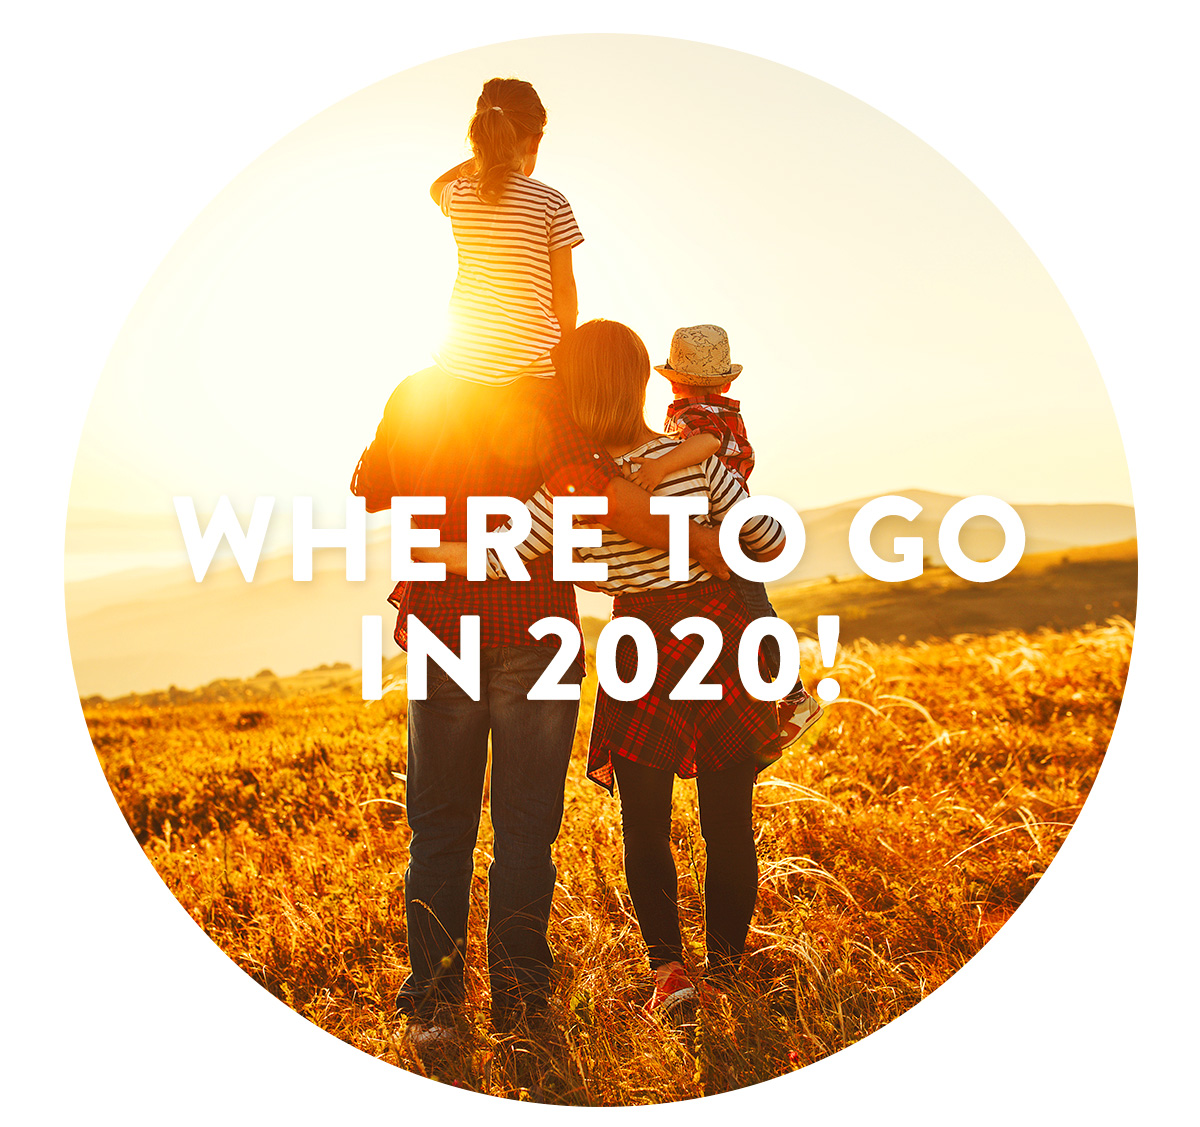 Where to Go in 2020!